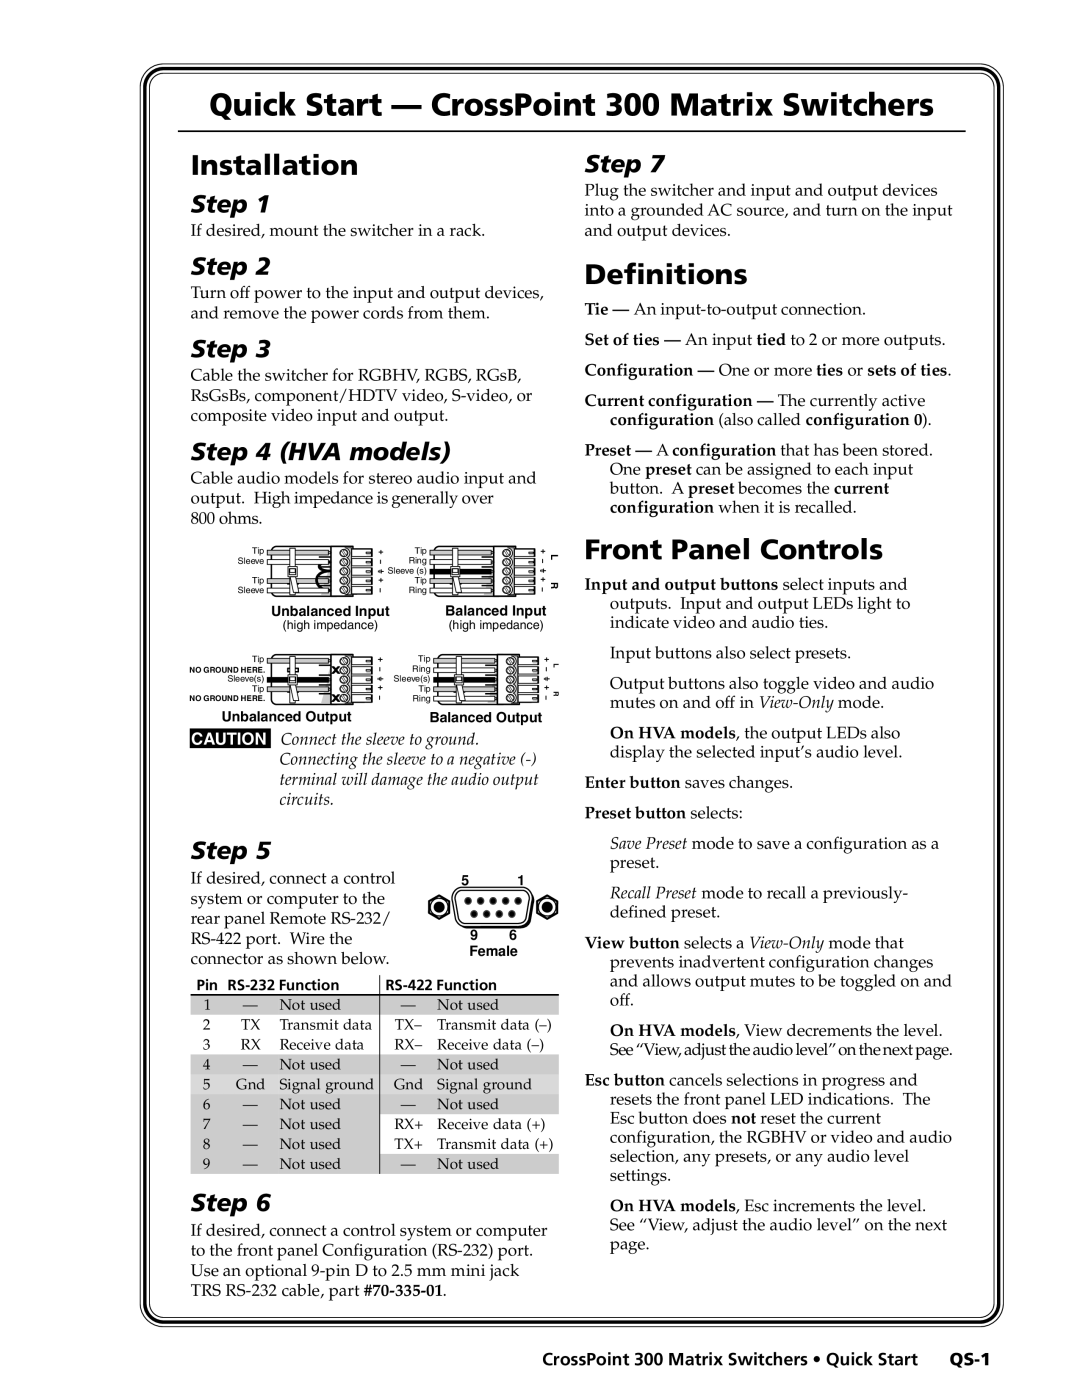 Extron electronic 124 Quick Start - CrossPoint 300 Matrix Switchers, Installation, Definitions, Front Panel Controls, QS-1 